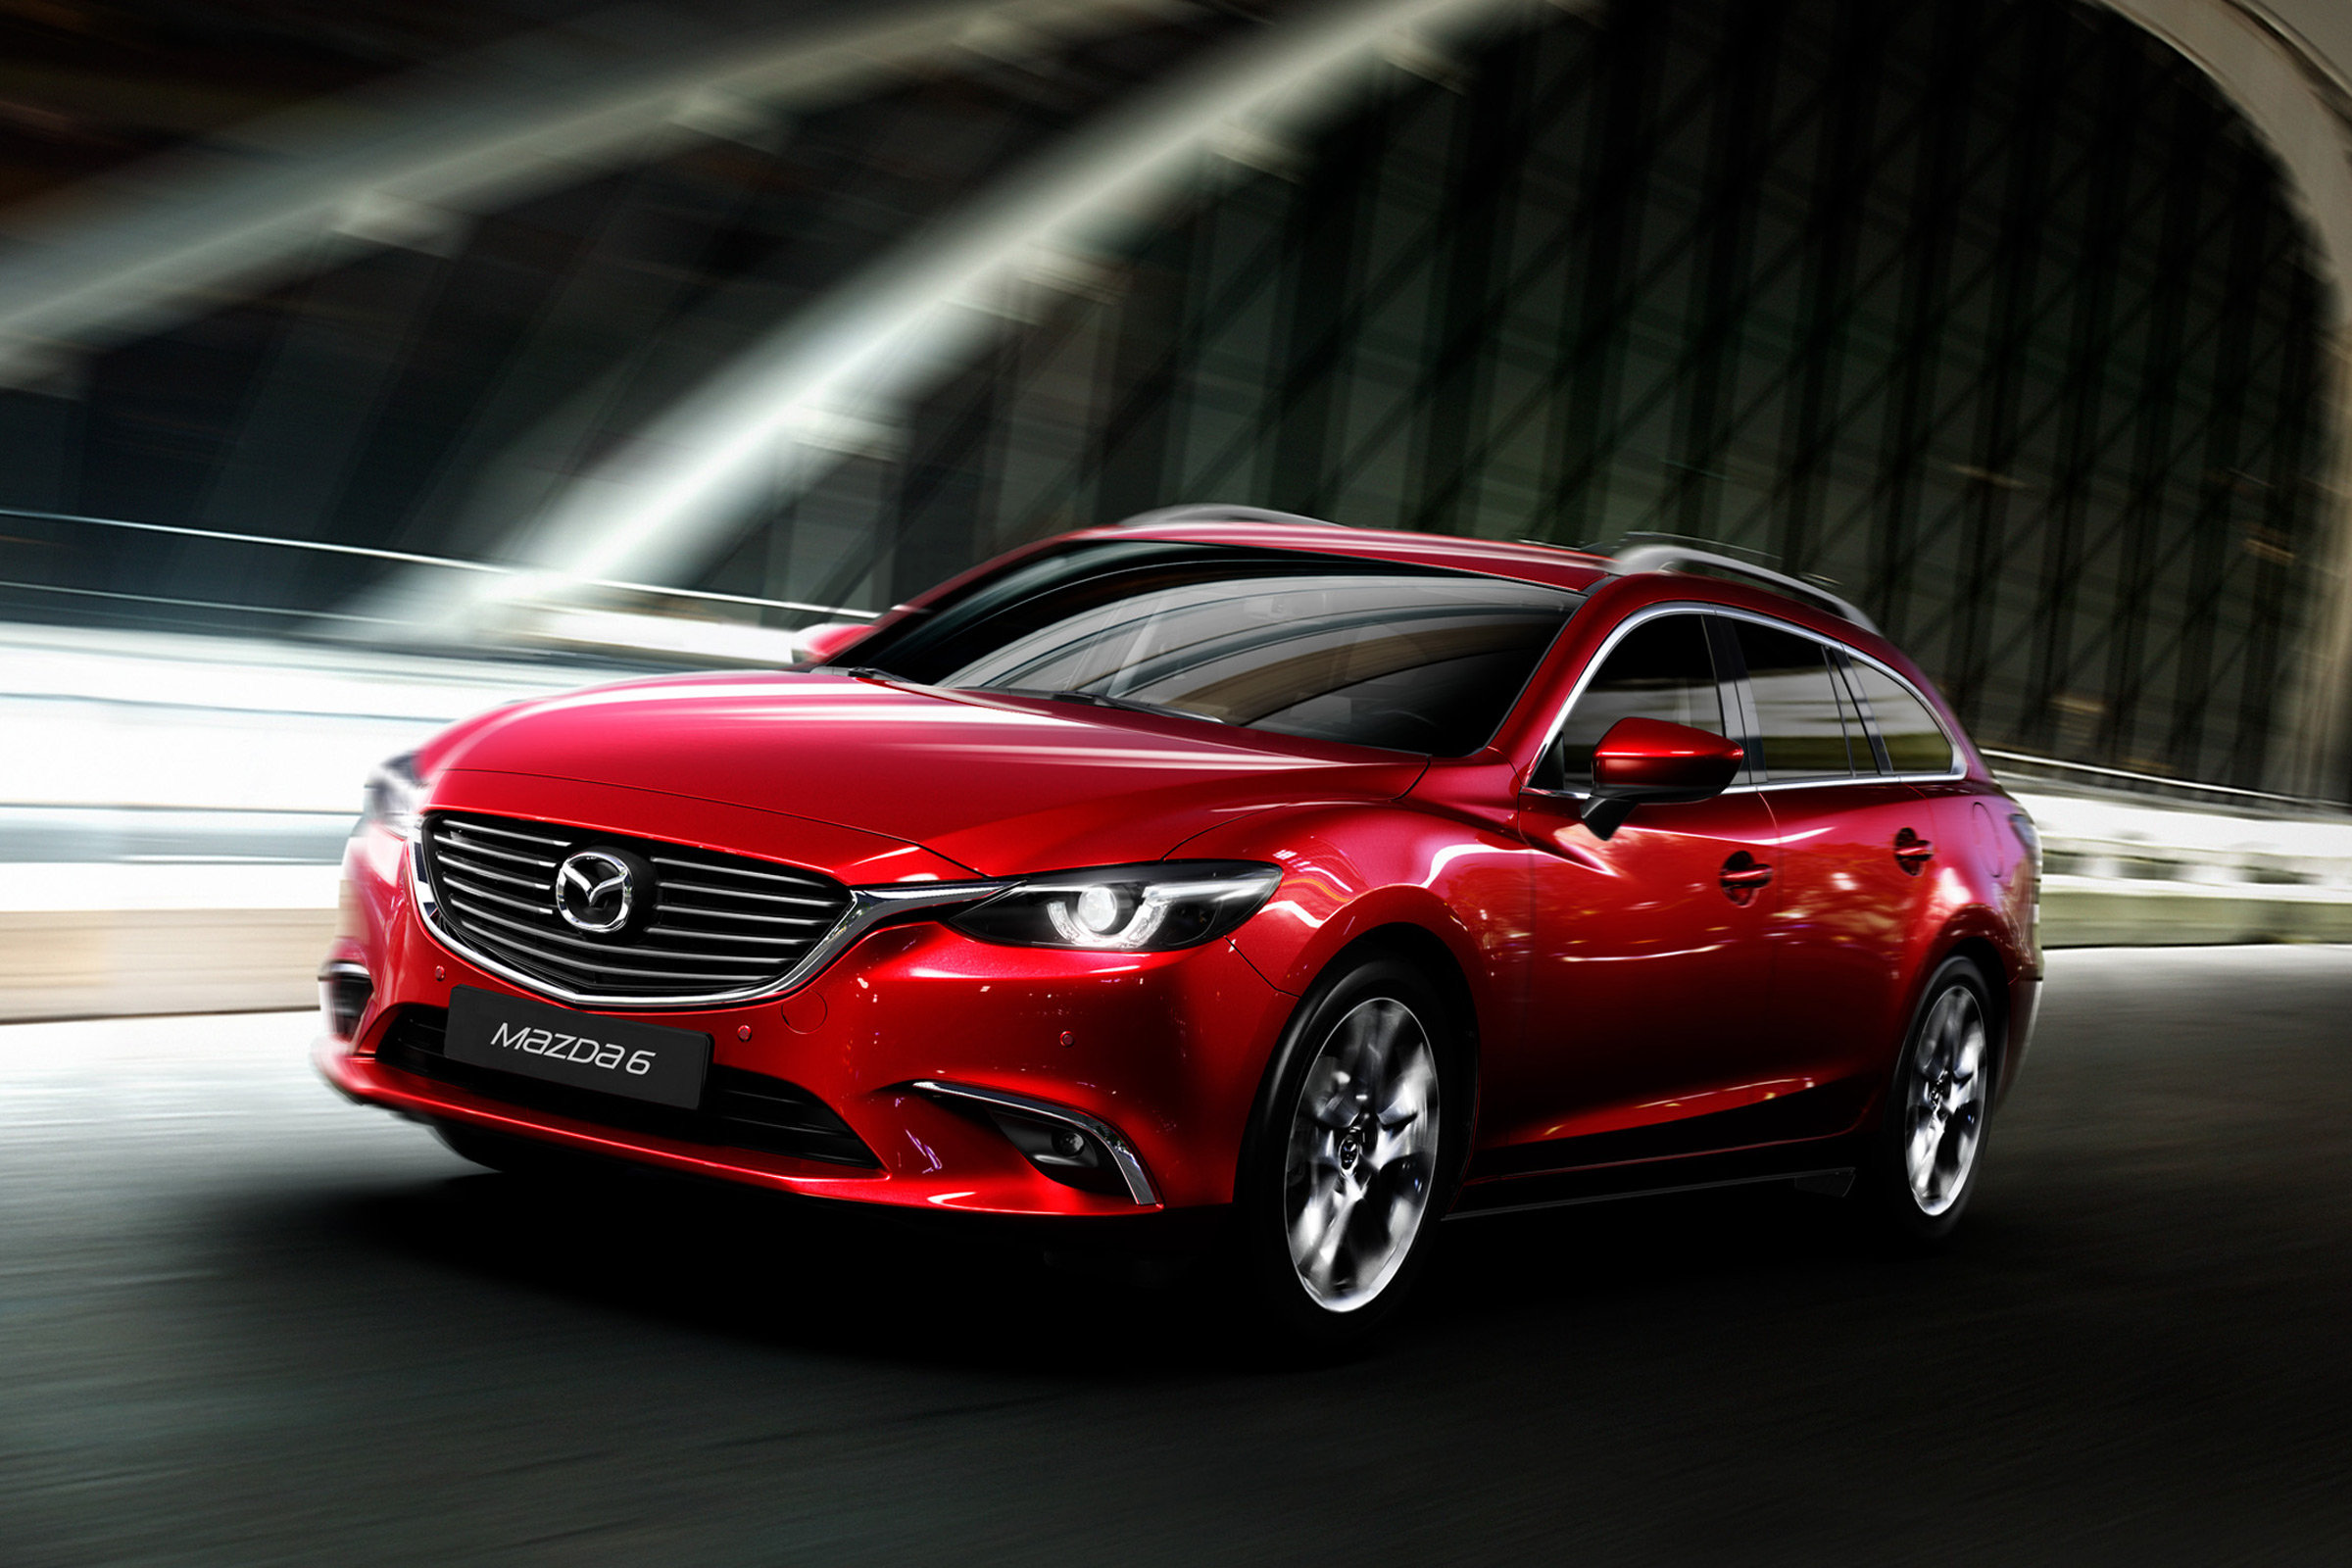 2015 Mazda6 facelift on sale early next year Carbuyer